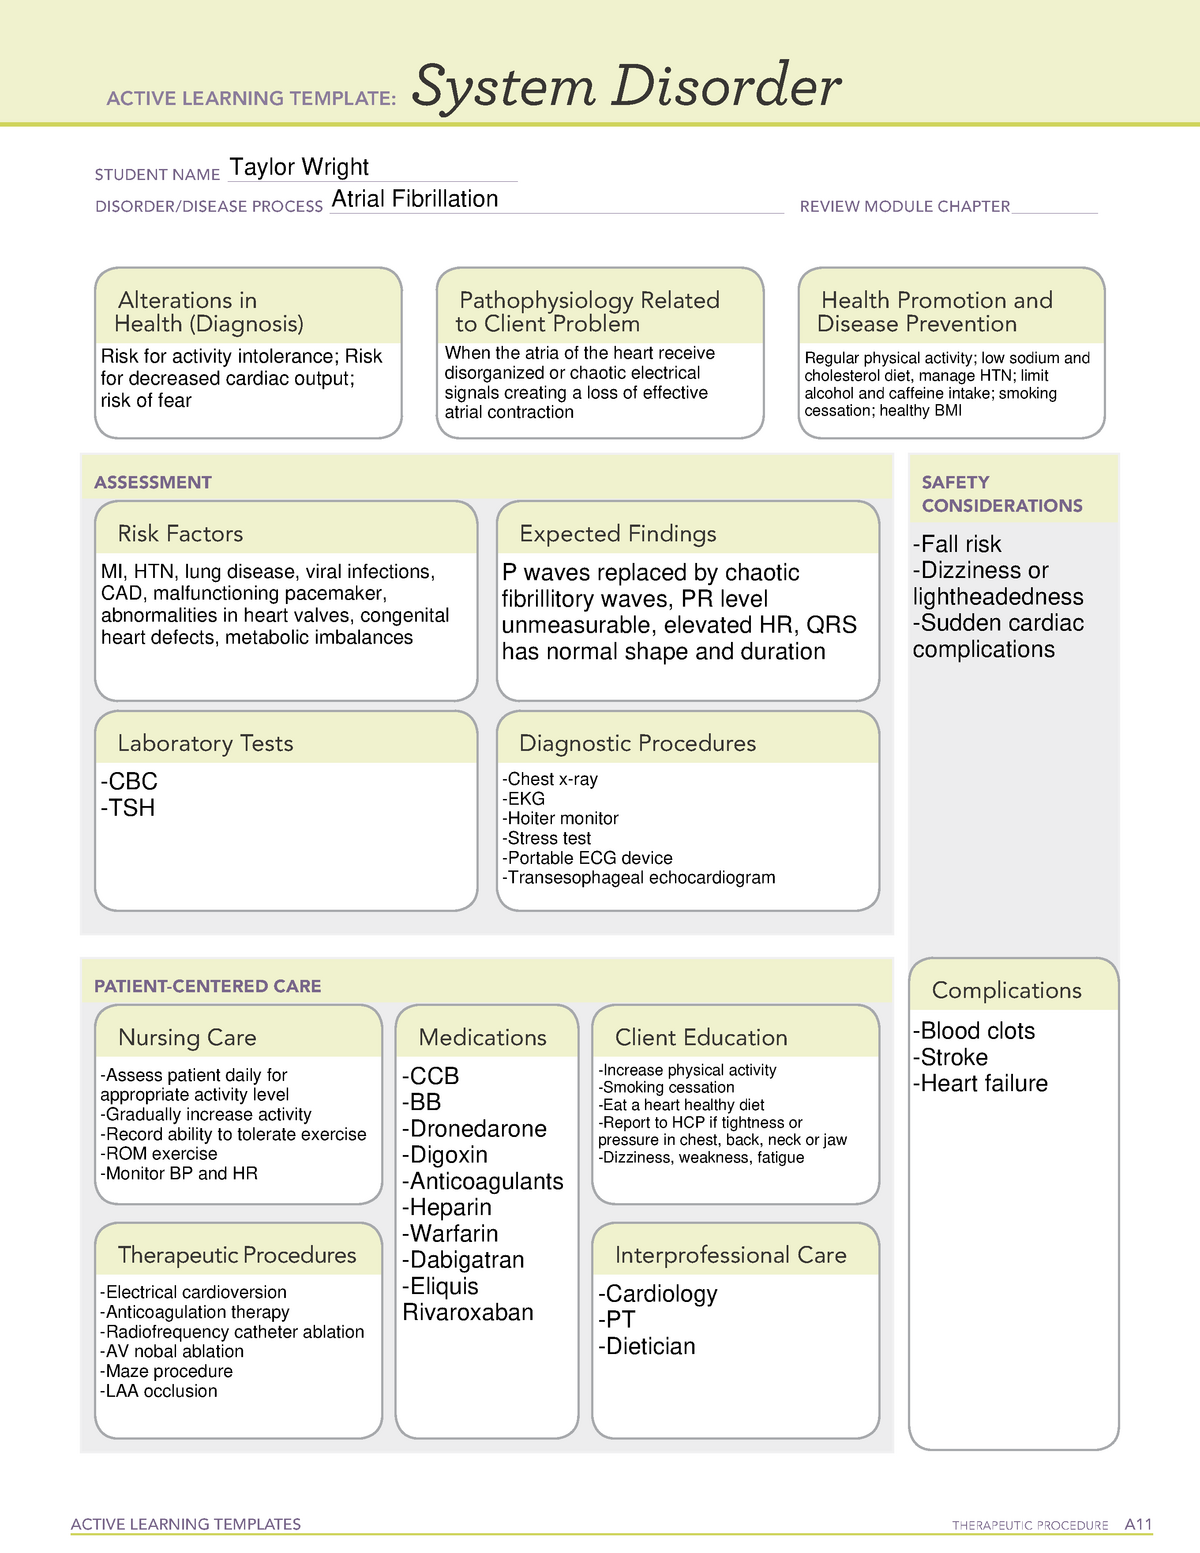 ATI - Atrial Fibrillation - MS3 Remediation - ACTIVE LEARNING TEMPLATES ...